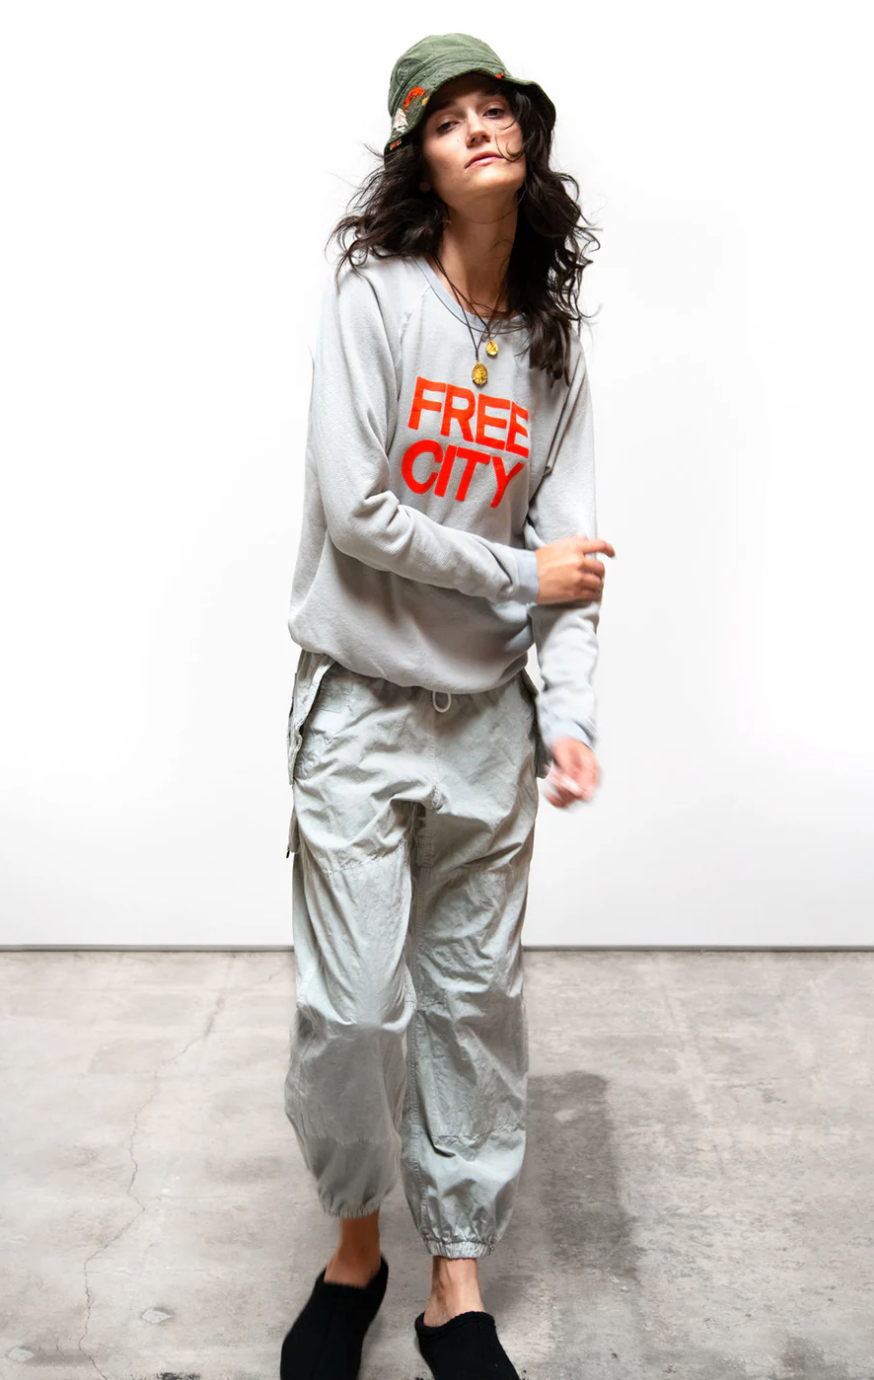 A woman in casual attire, wearing an orange Free City (sparrow, LLC) "FREECITY SUPERYUMM BIGGY RAGLAN" sweatshirt and grey pants, dances with her hair tossed mid-movement against a plain white background.